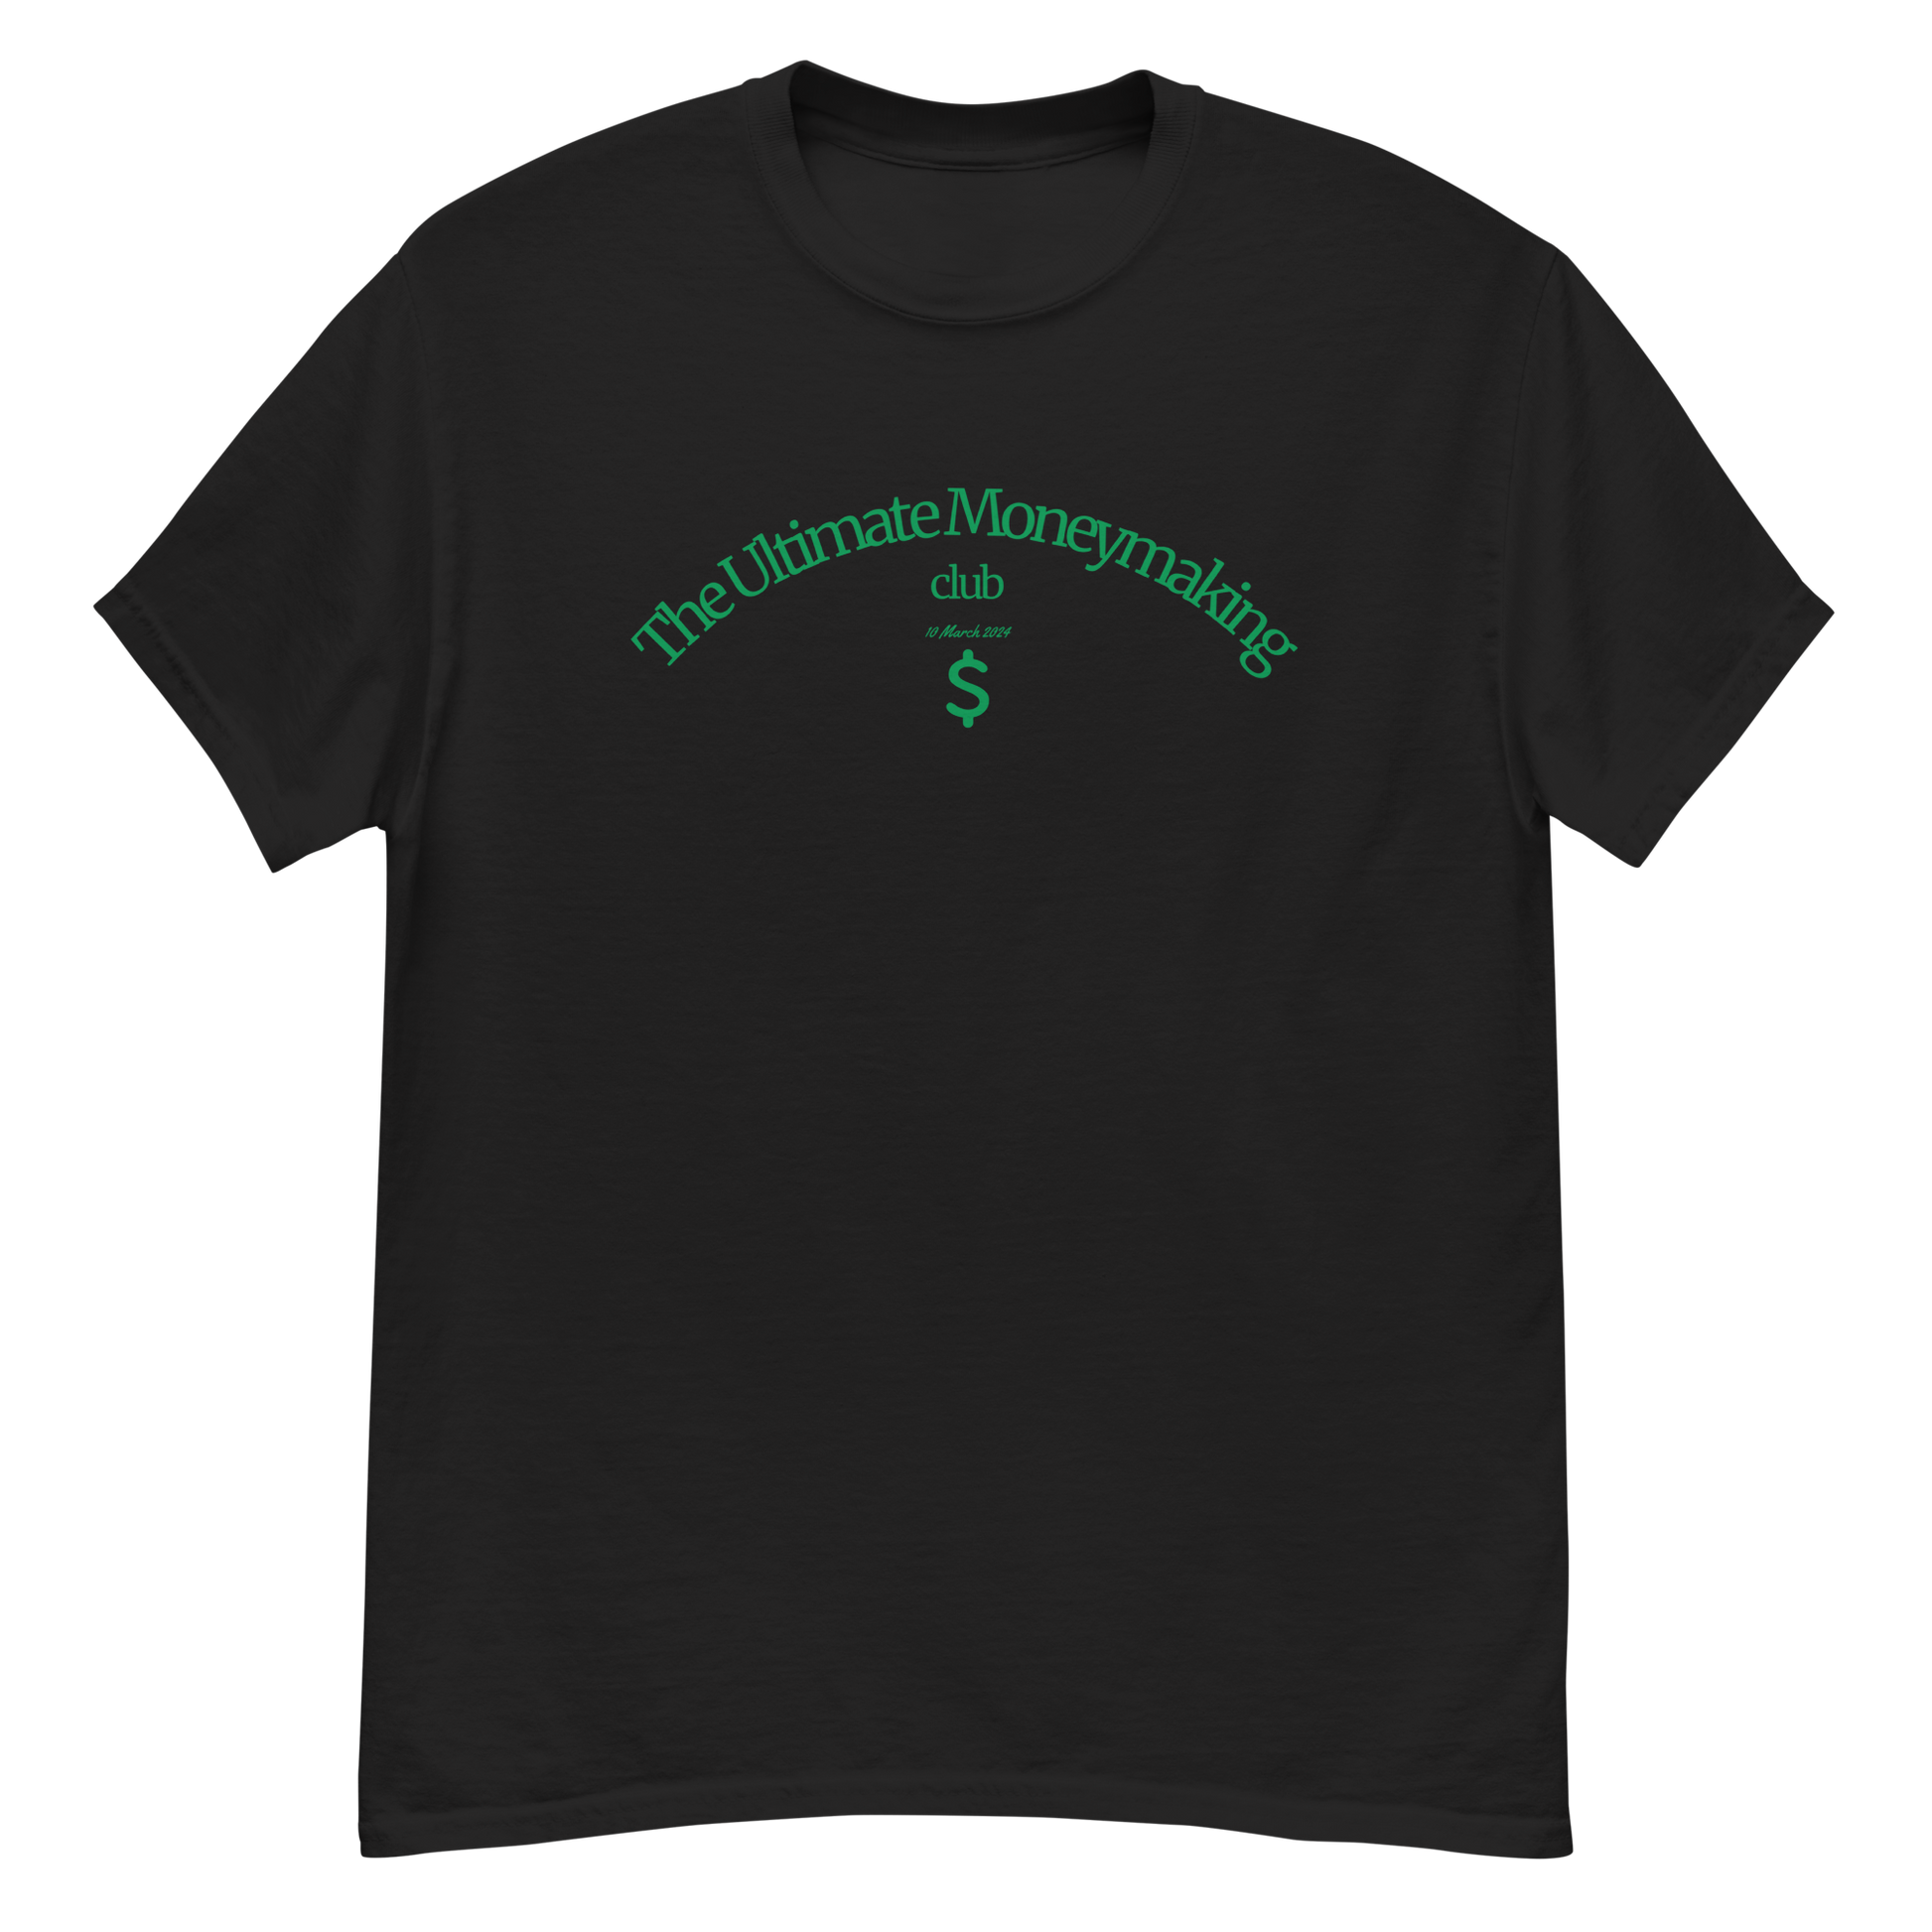 A black T-shirt featuring the Ultimate Moneymaking Club logo, symbolizing success, hustle, and wealth.